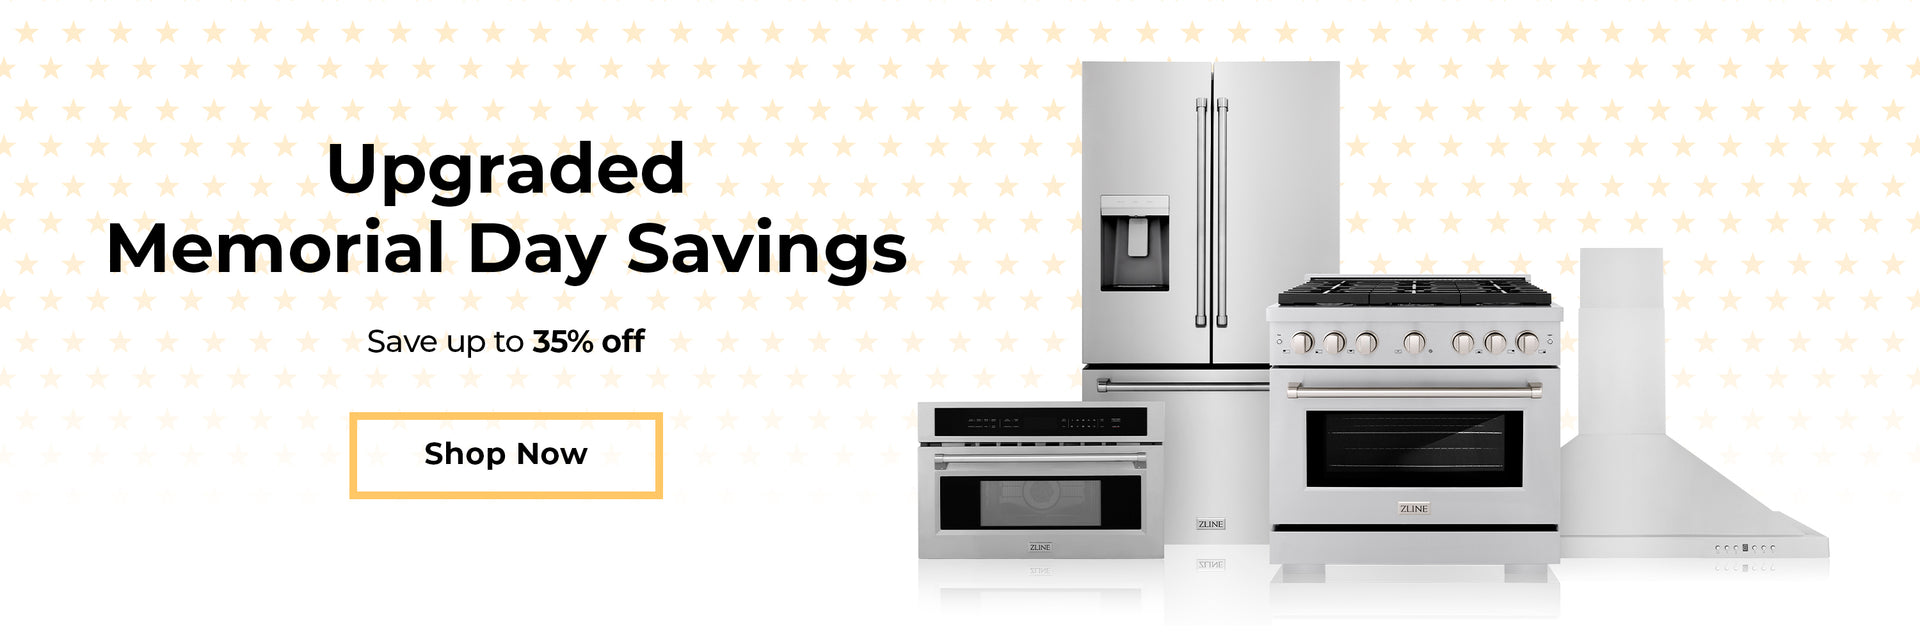 Luxury appliances in a farmhouse-style kitchen. Text: Upgraded Memorial Day Savings. Save up to 35% off. Button: Shop Now.